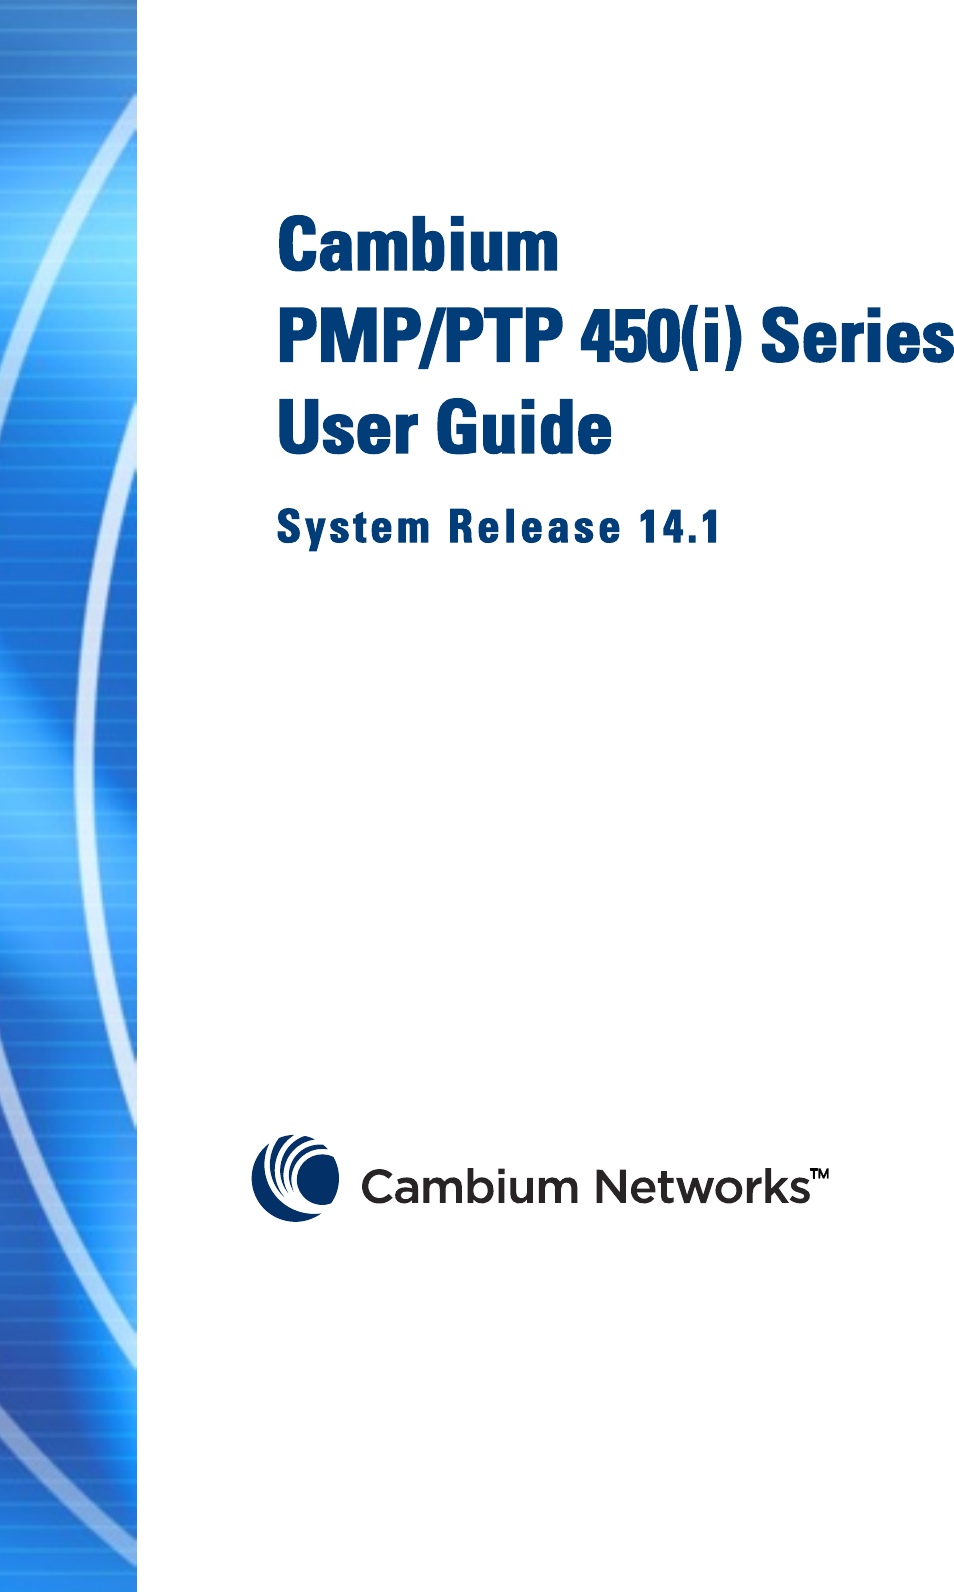  33F  Cambium  PMP/PTP 450(i) Series  User Guide System Release 14.1                  pass  